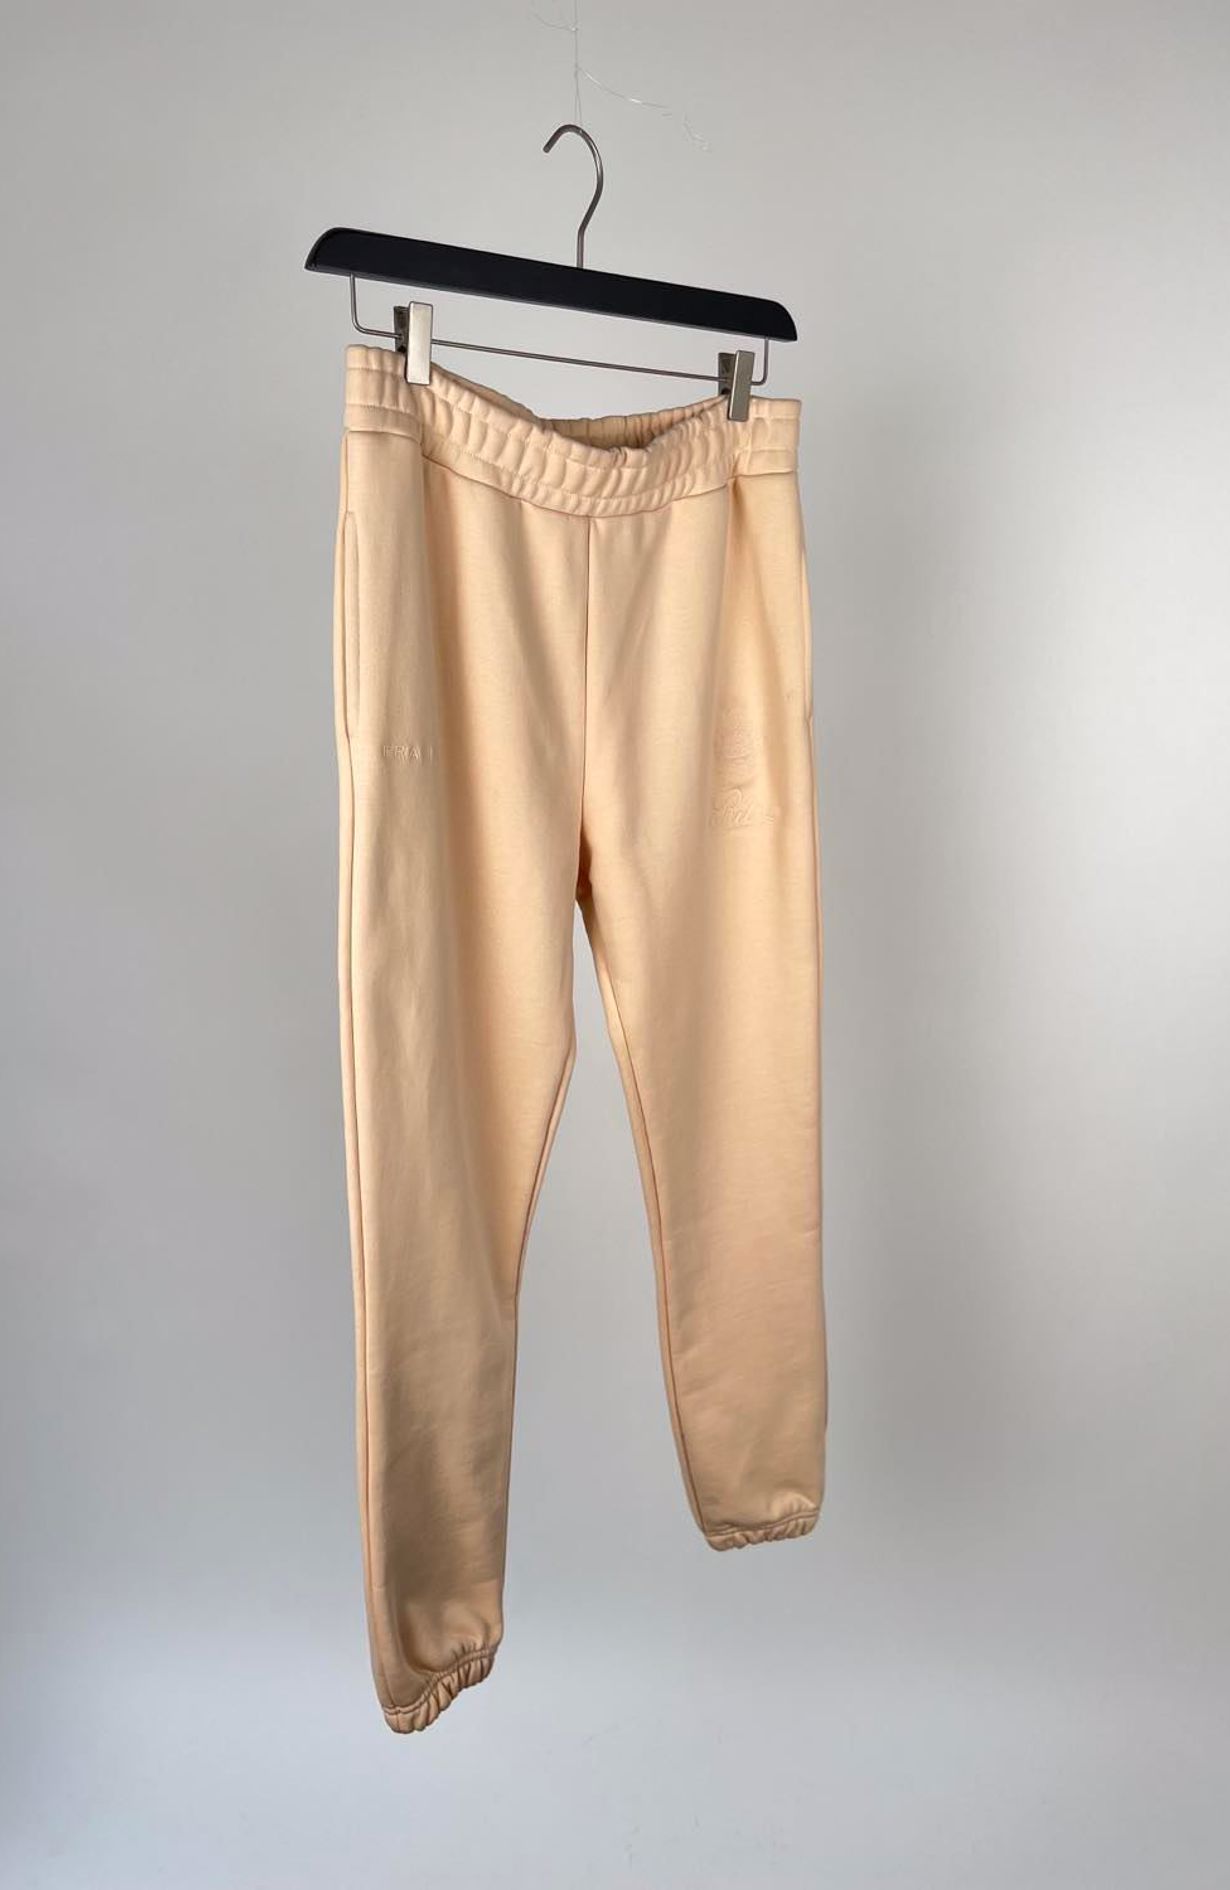 Frame x Ritz room service trackpants size s